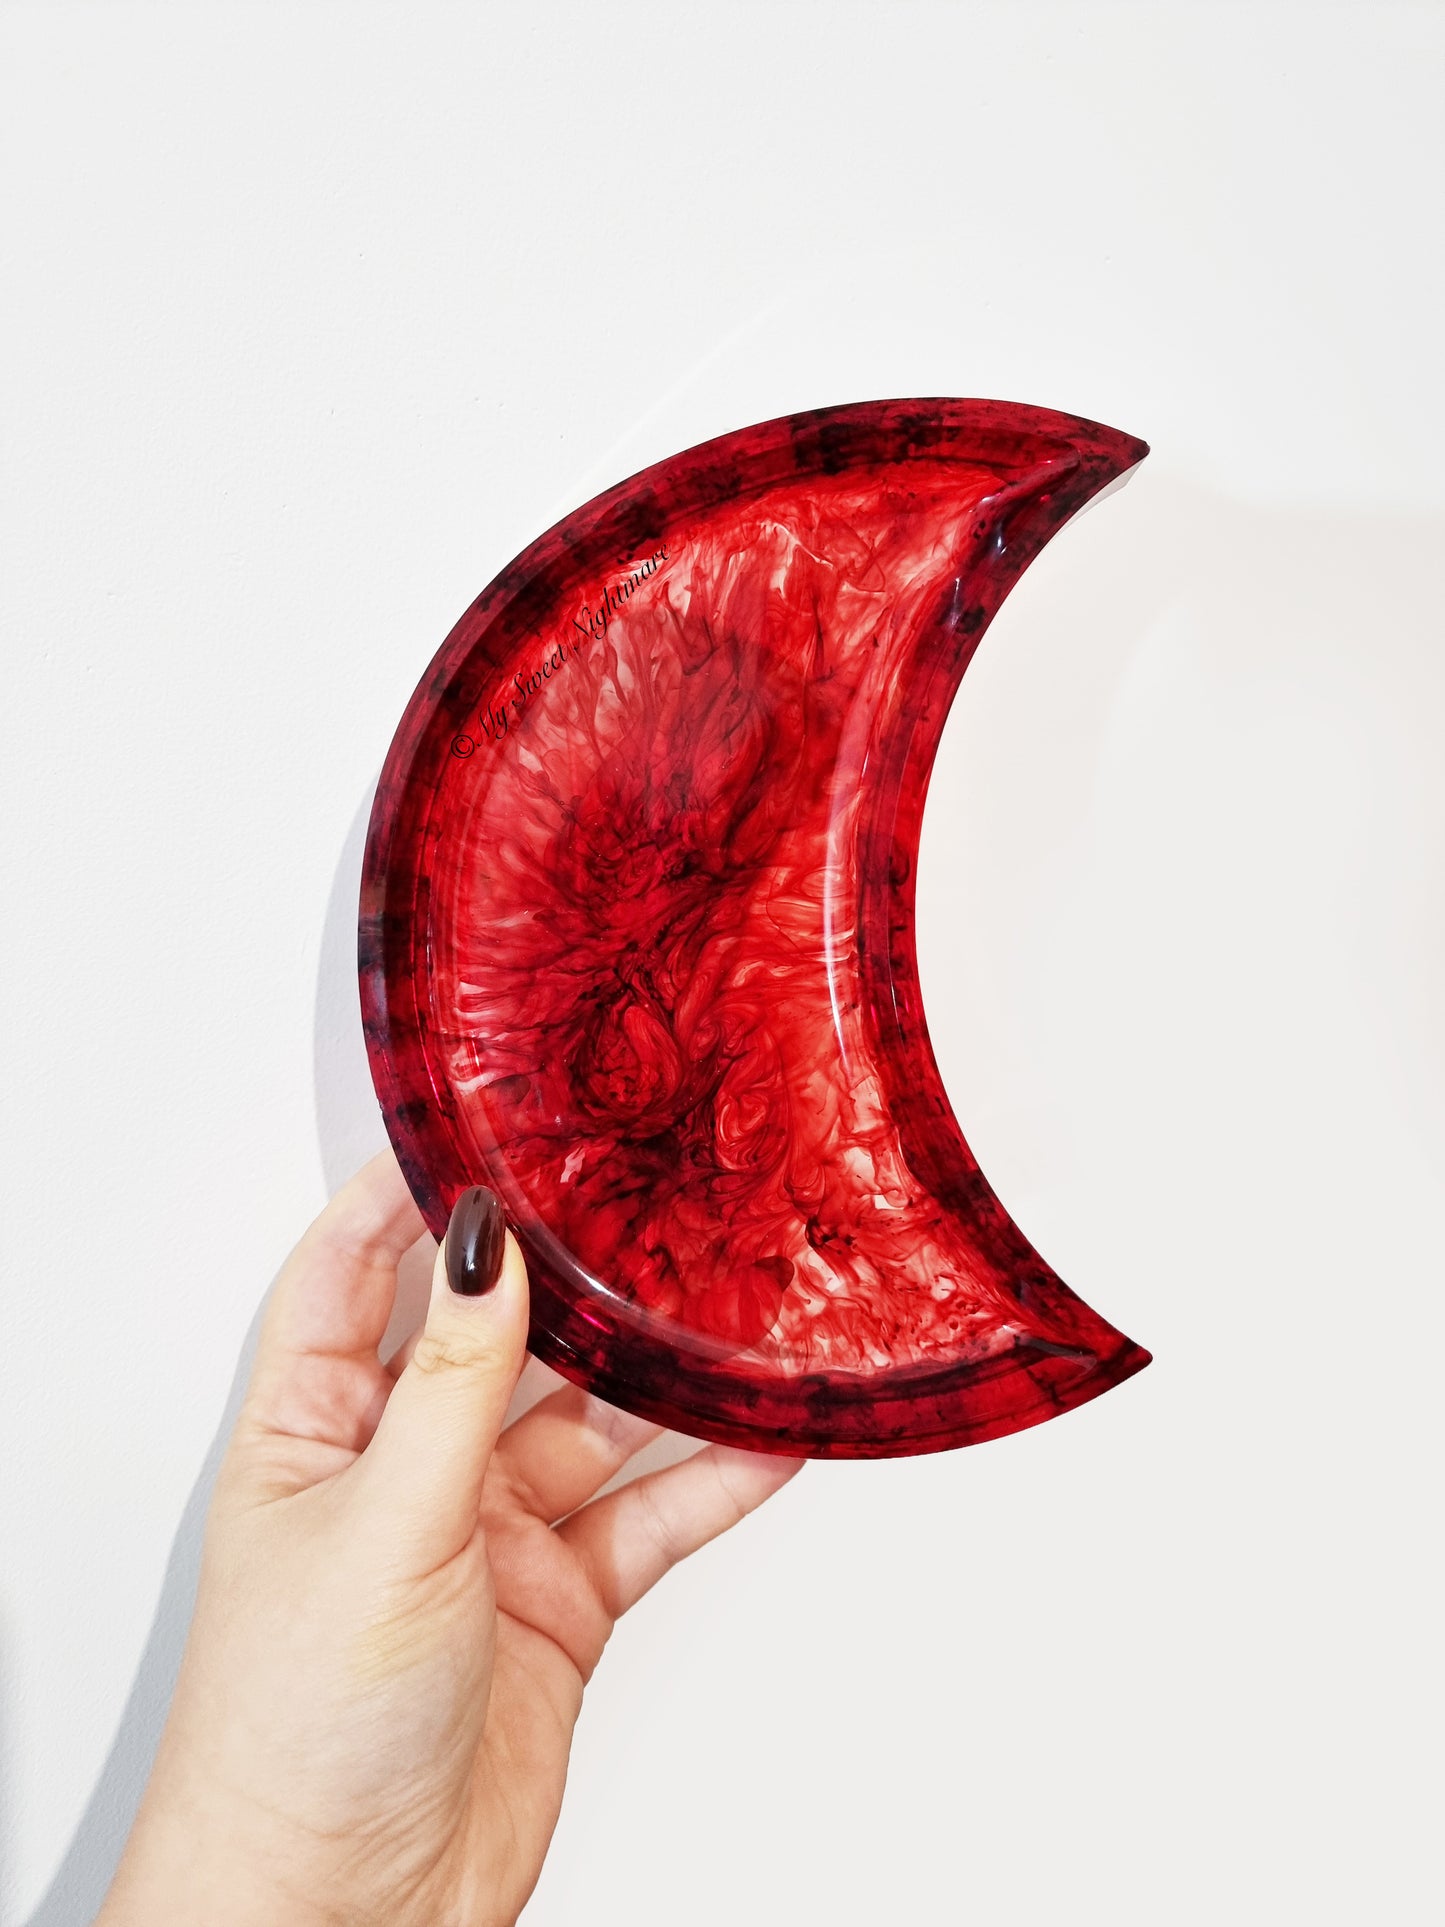 Pocket tray with Crescent Moon and Blood Effect